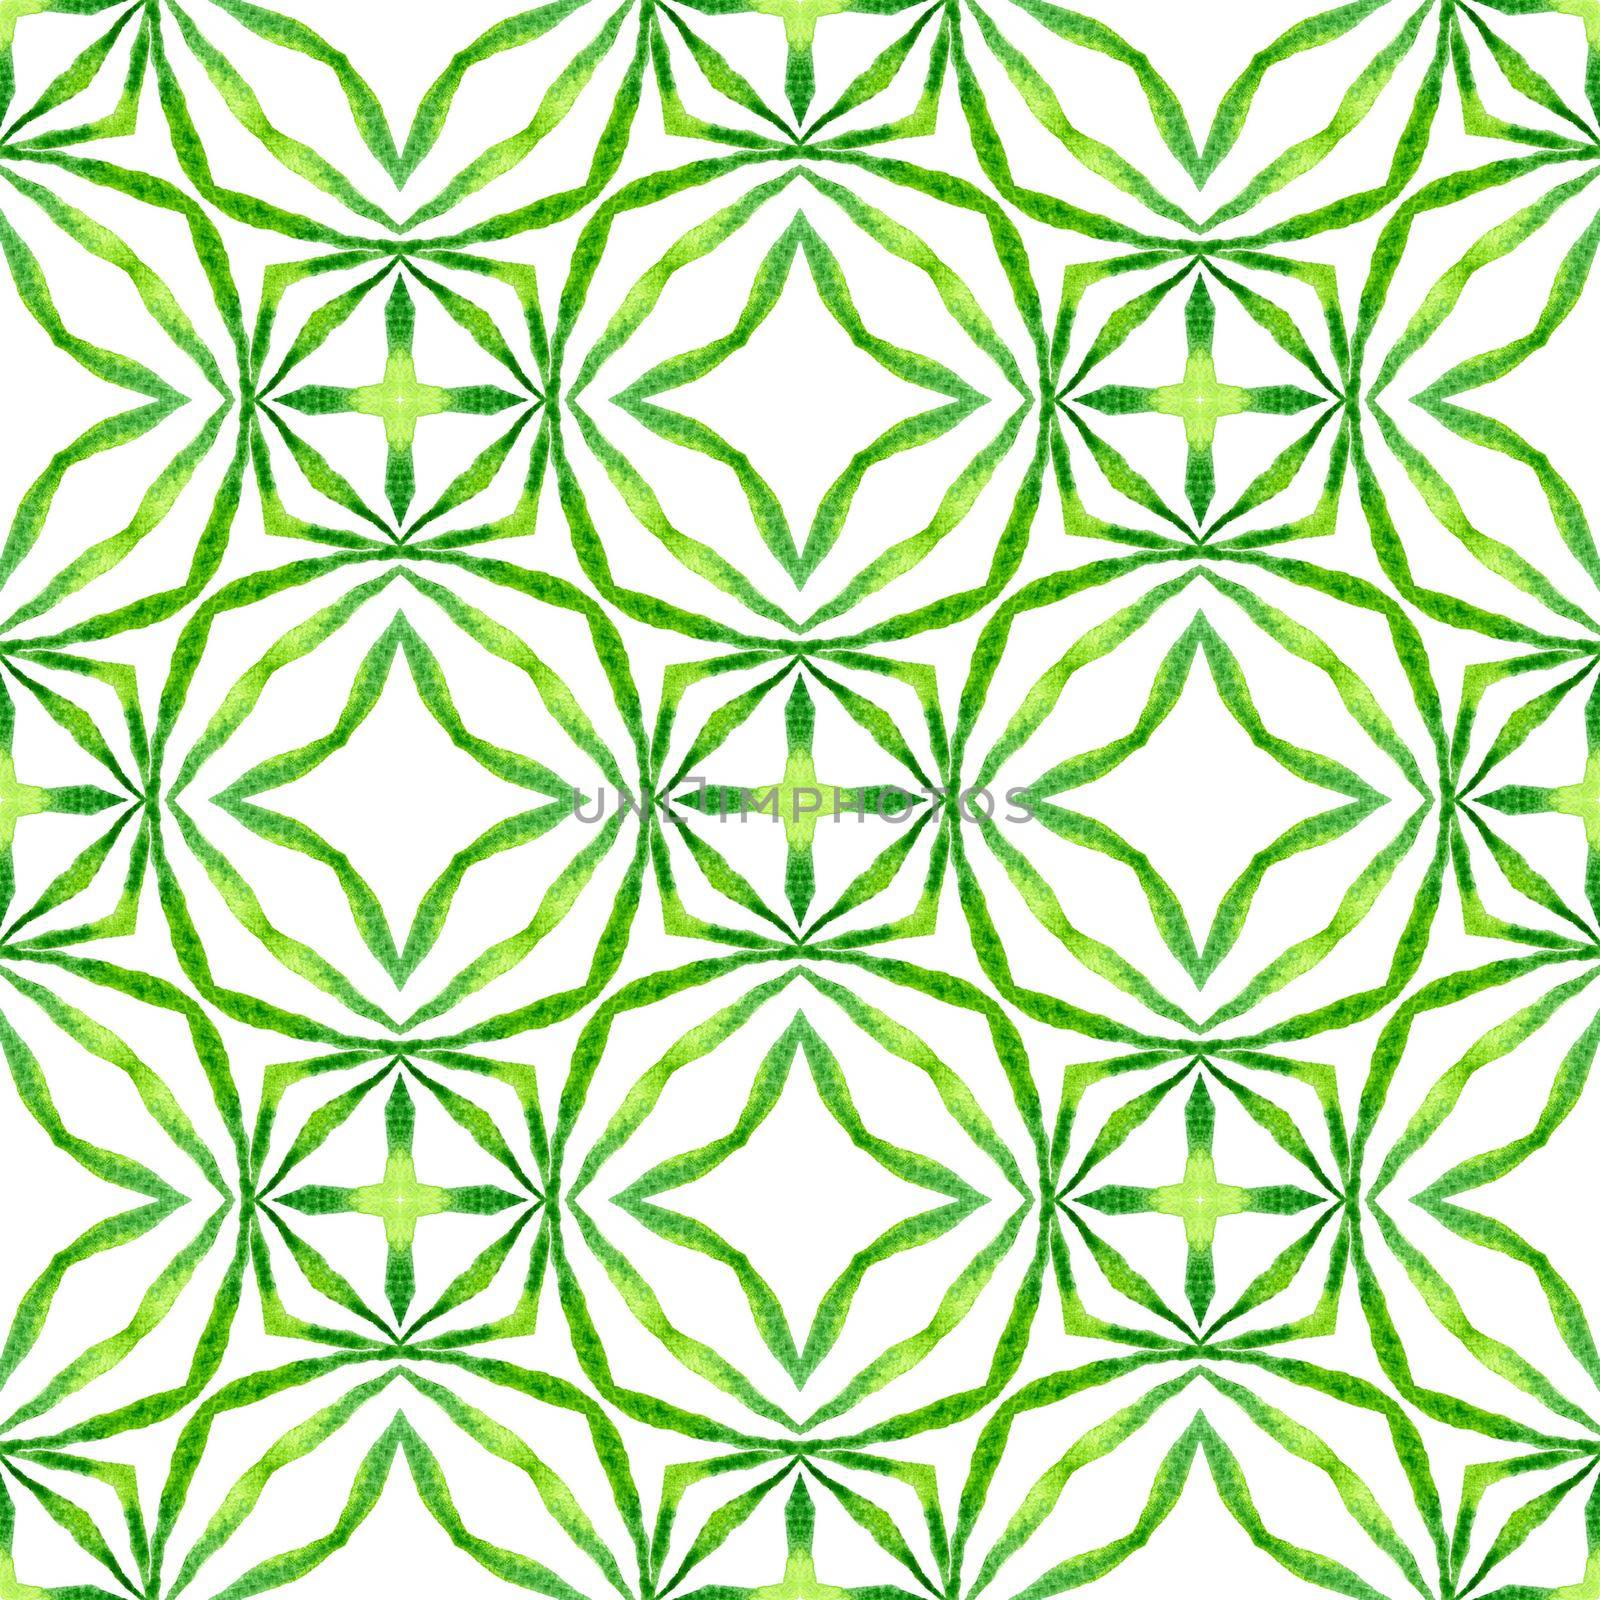 Tiled watercolor background. Green wondrous boho chic summer design. Hand painted tiled watercolor border. Textile ready curious print, swimwear fabric, wallpaper, wrapping.